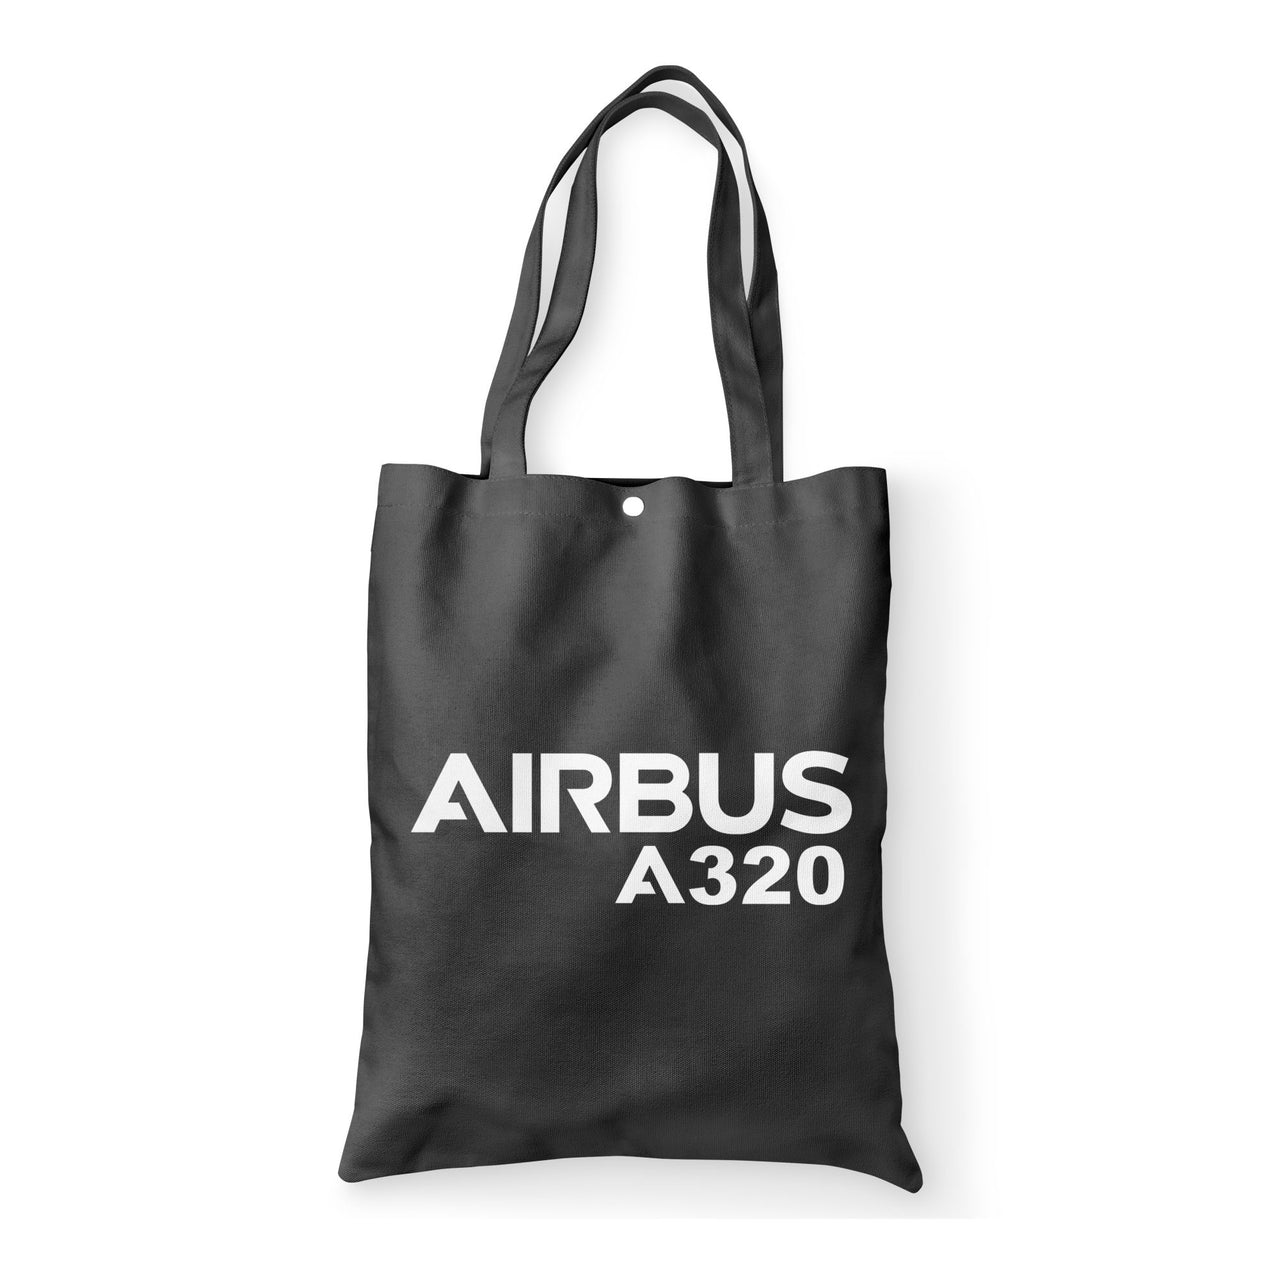 Airbus A320 & Text Designed Tote Bags